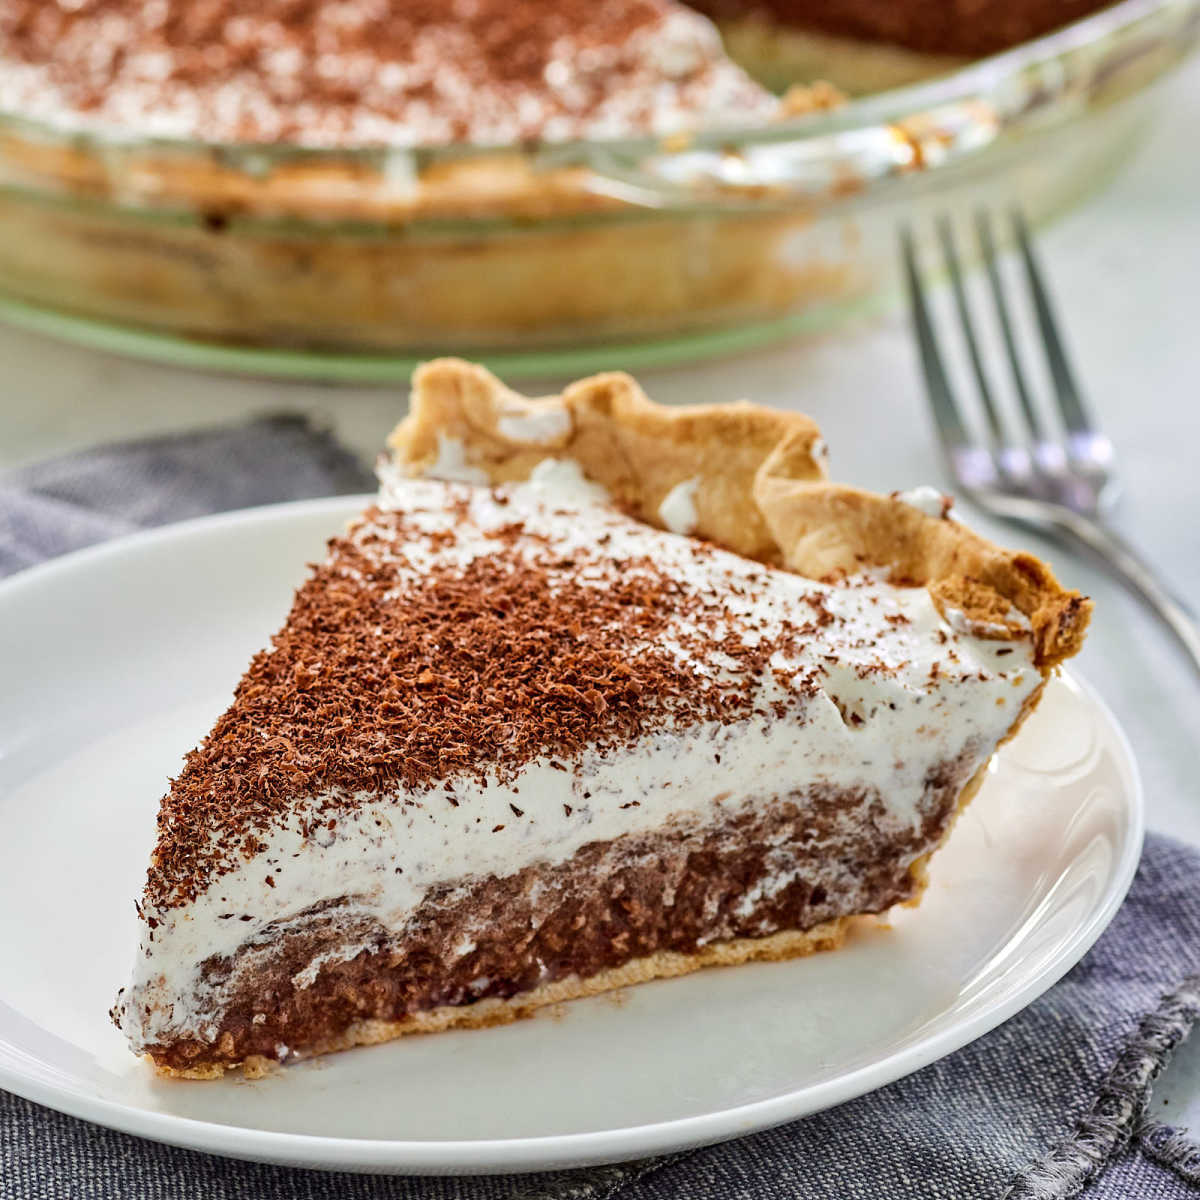 Piece of homemade french silk pie with rich chocolate filling that is more solid than a pudding filling topped with whipped cream and chocolate shavings, ready to eat.